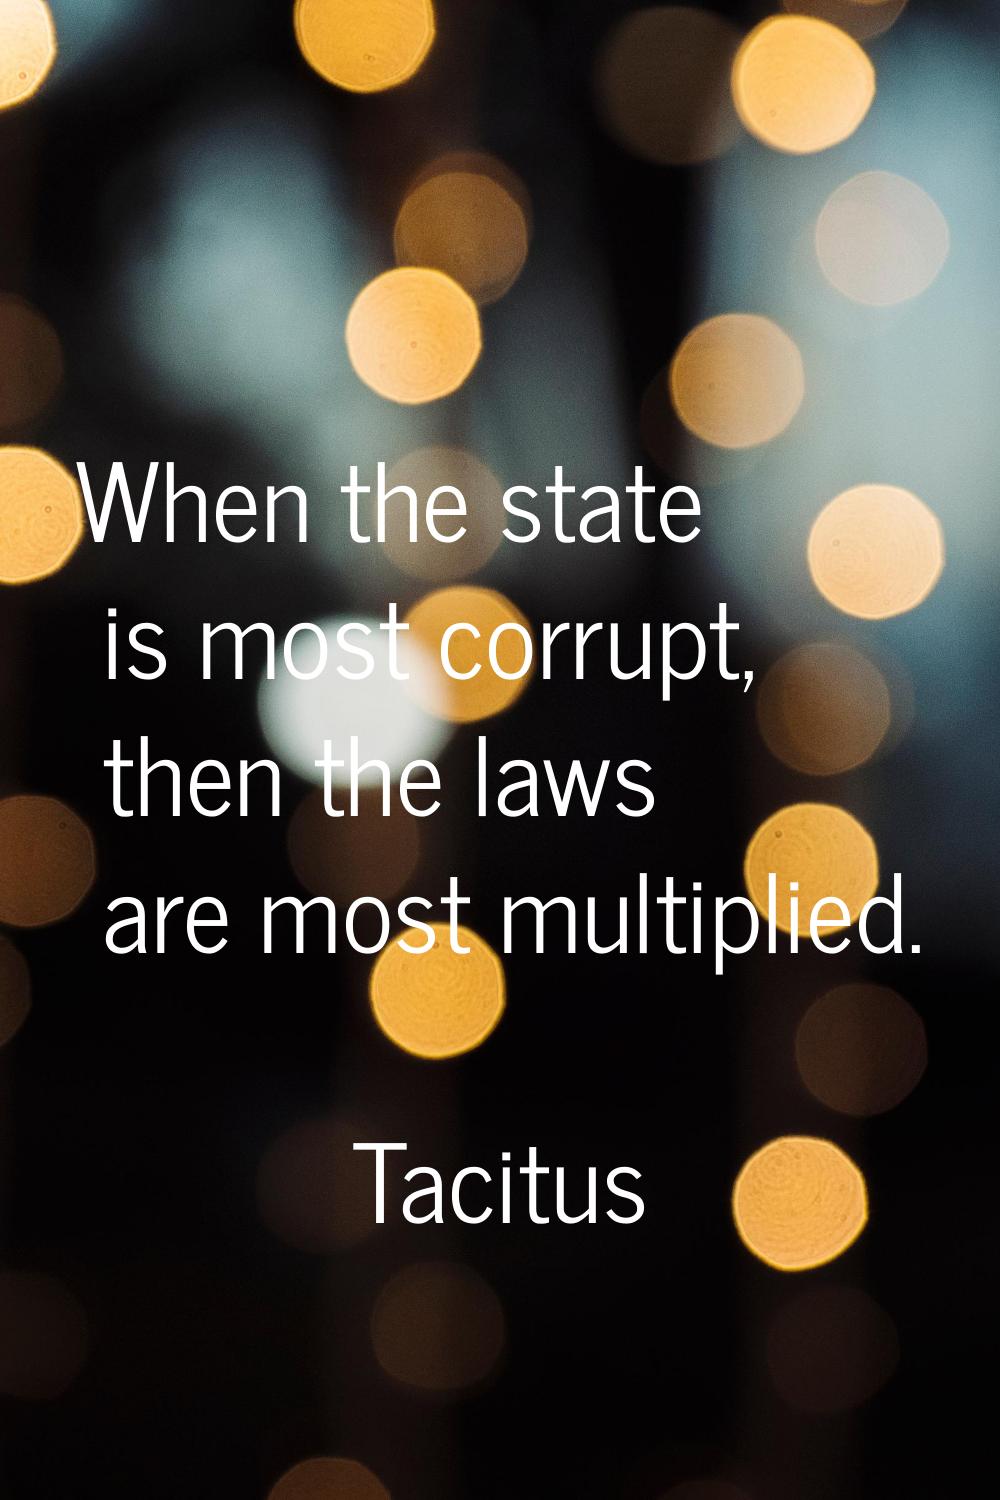 When the state is most corrupt, then the laws are most multiplied.